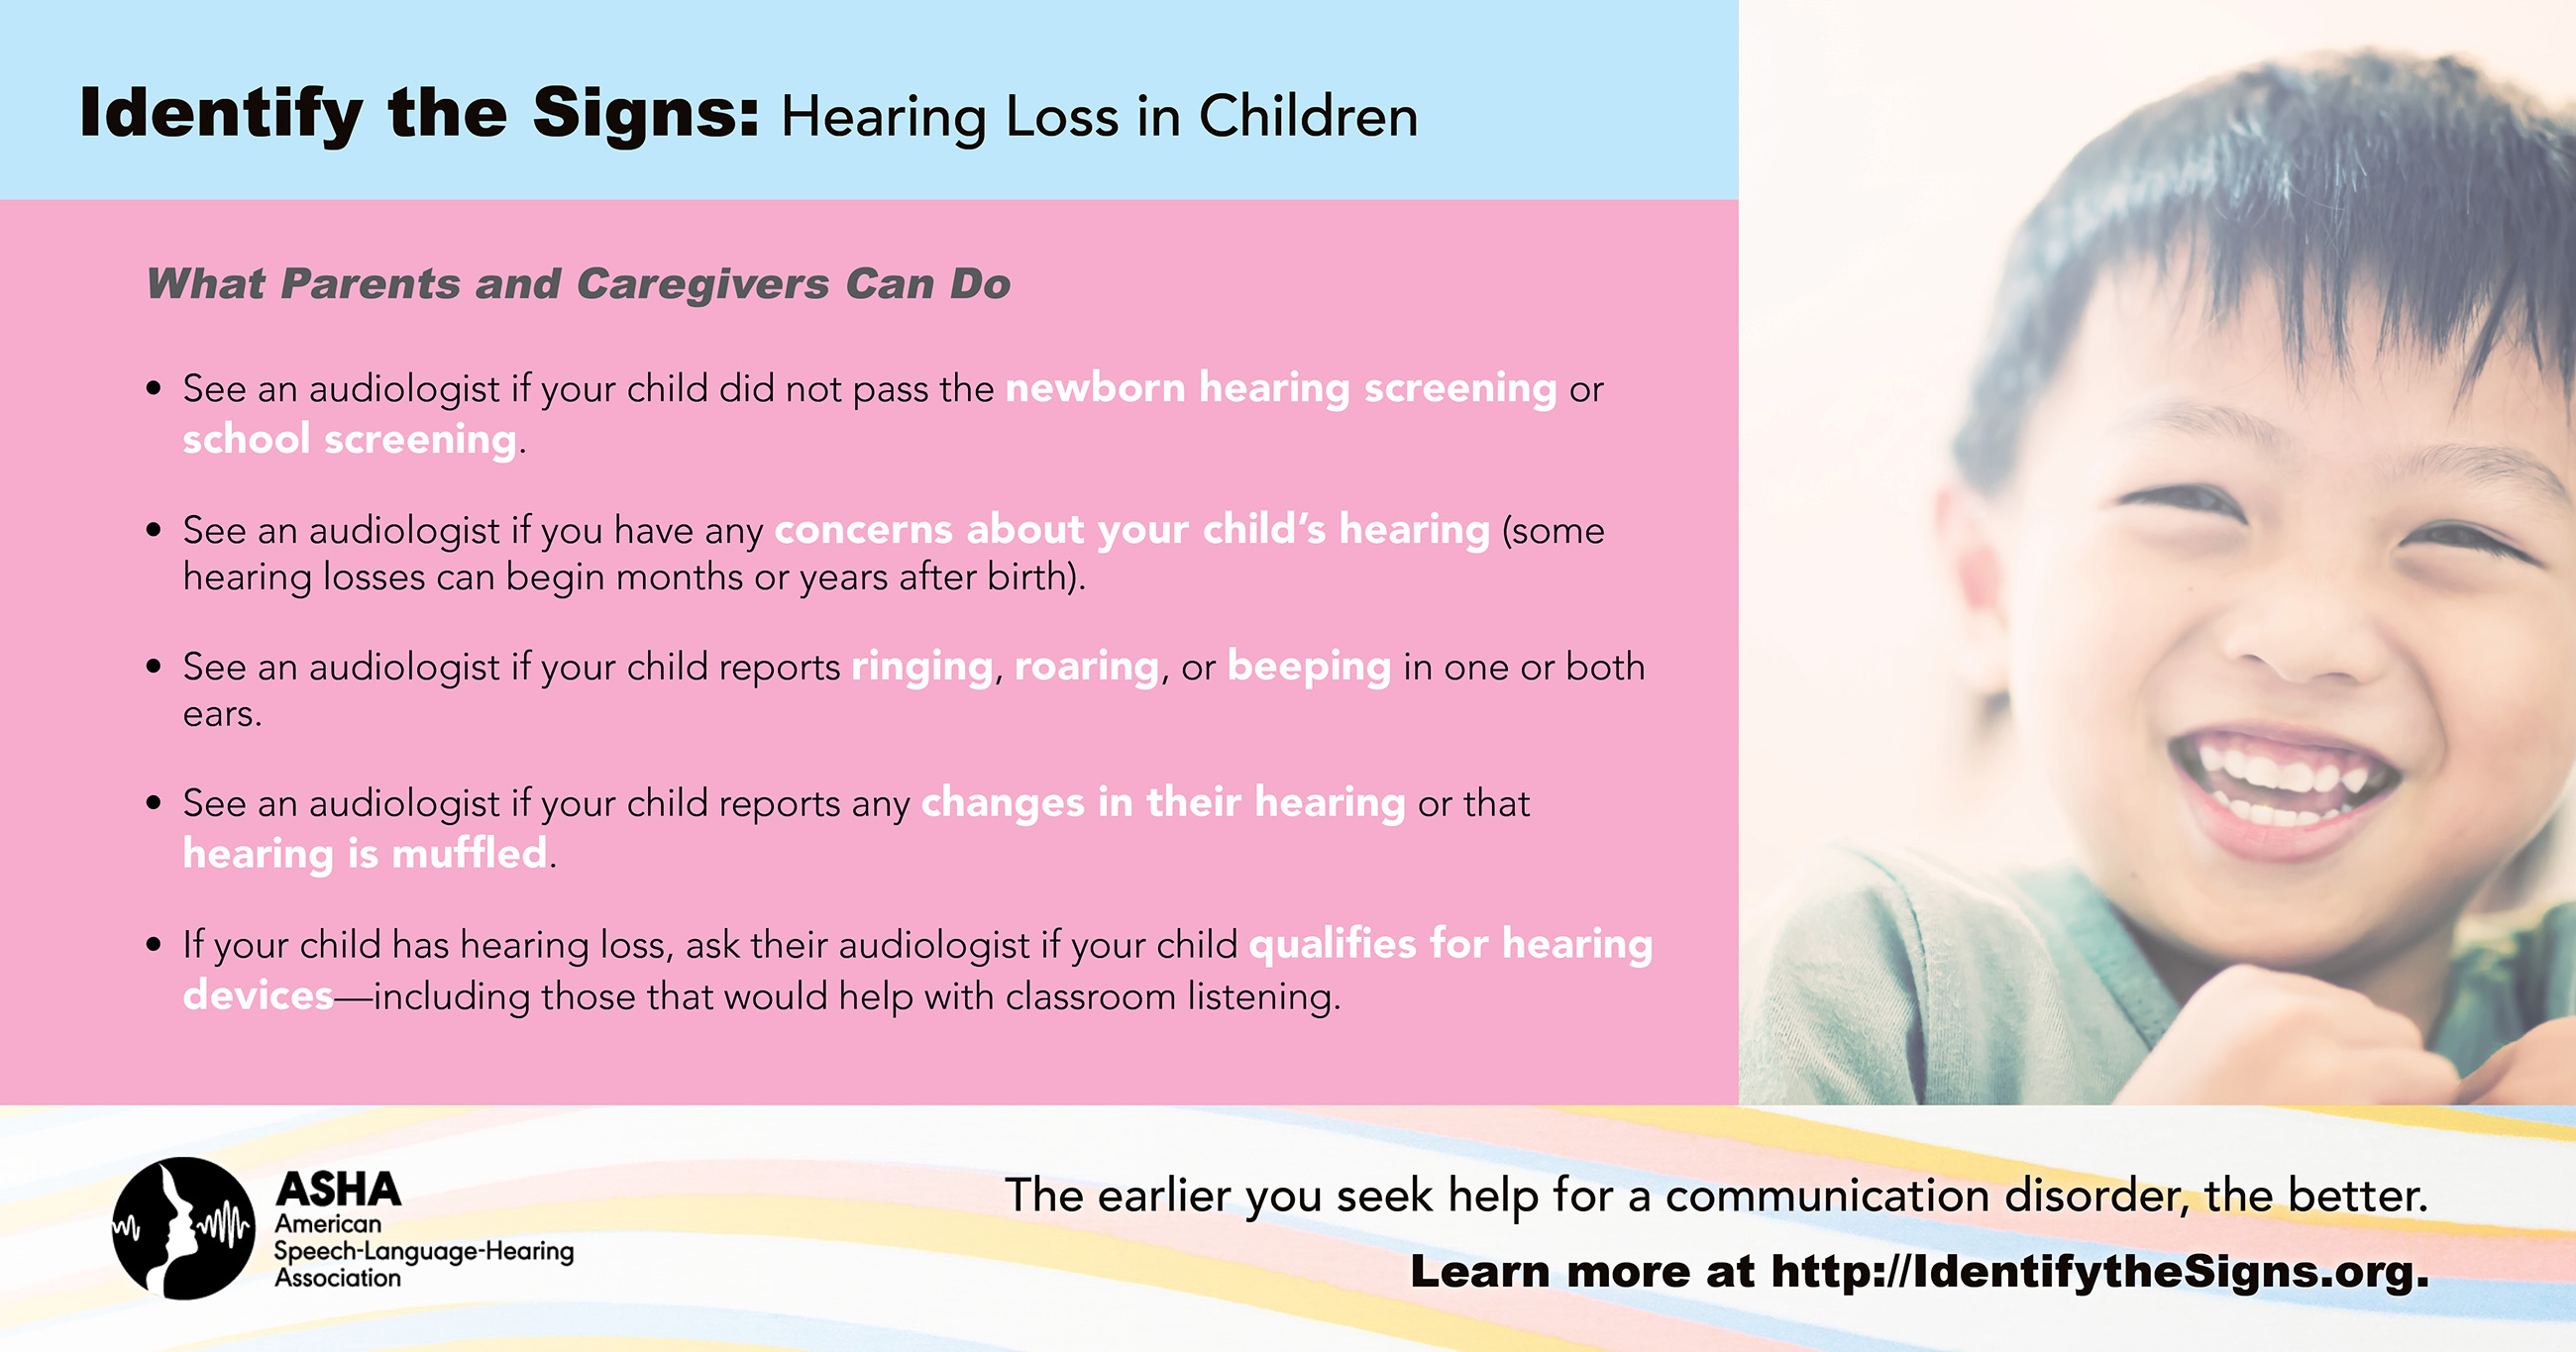 Tips for caregivers to help a child with hearing loss.